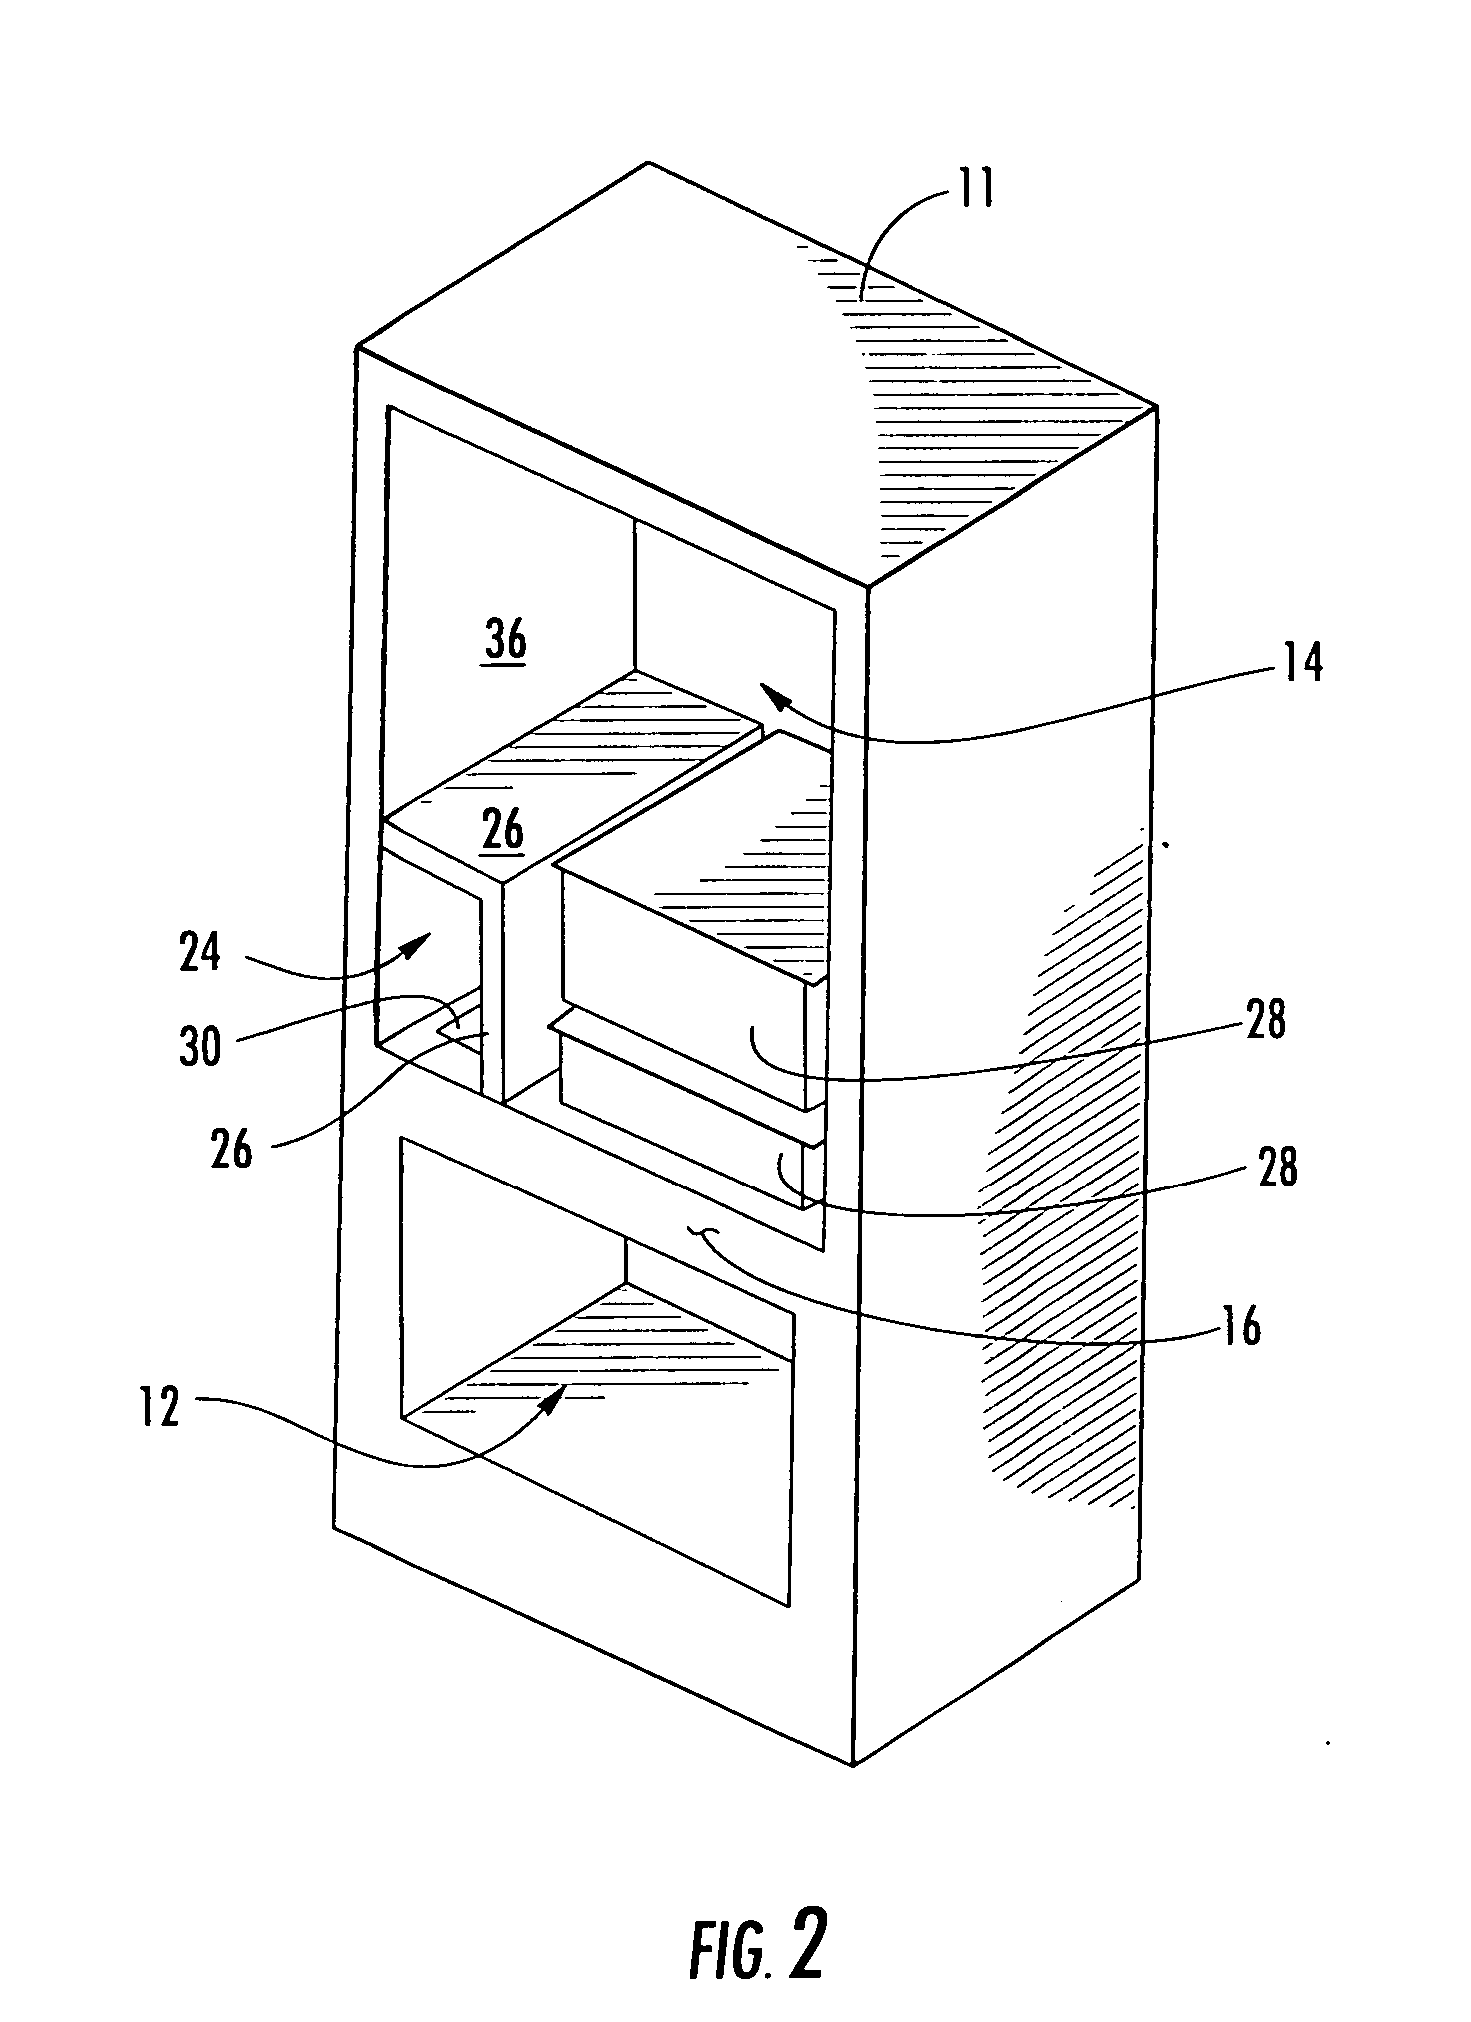 Apparatus and method for dispensing ice from a bottom mount refrigerator